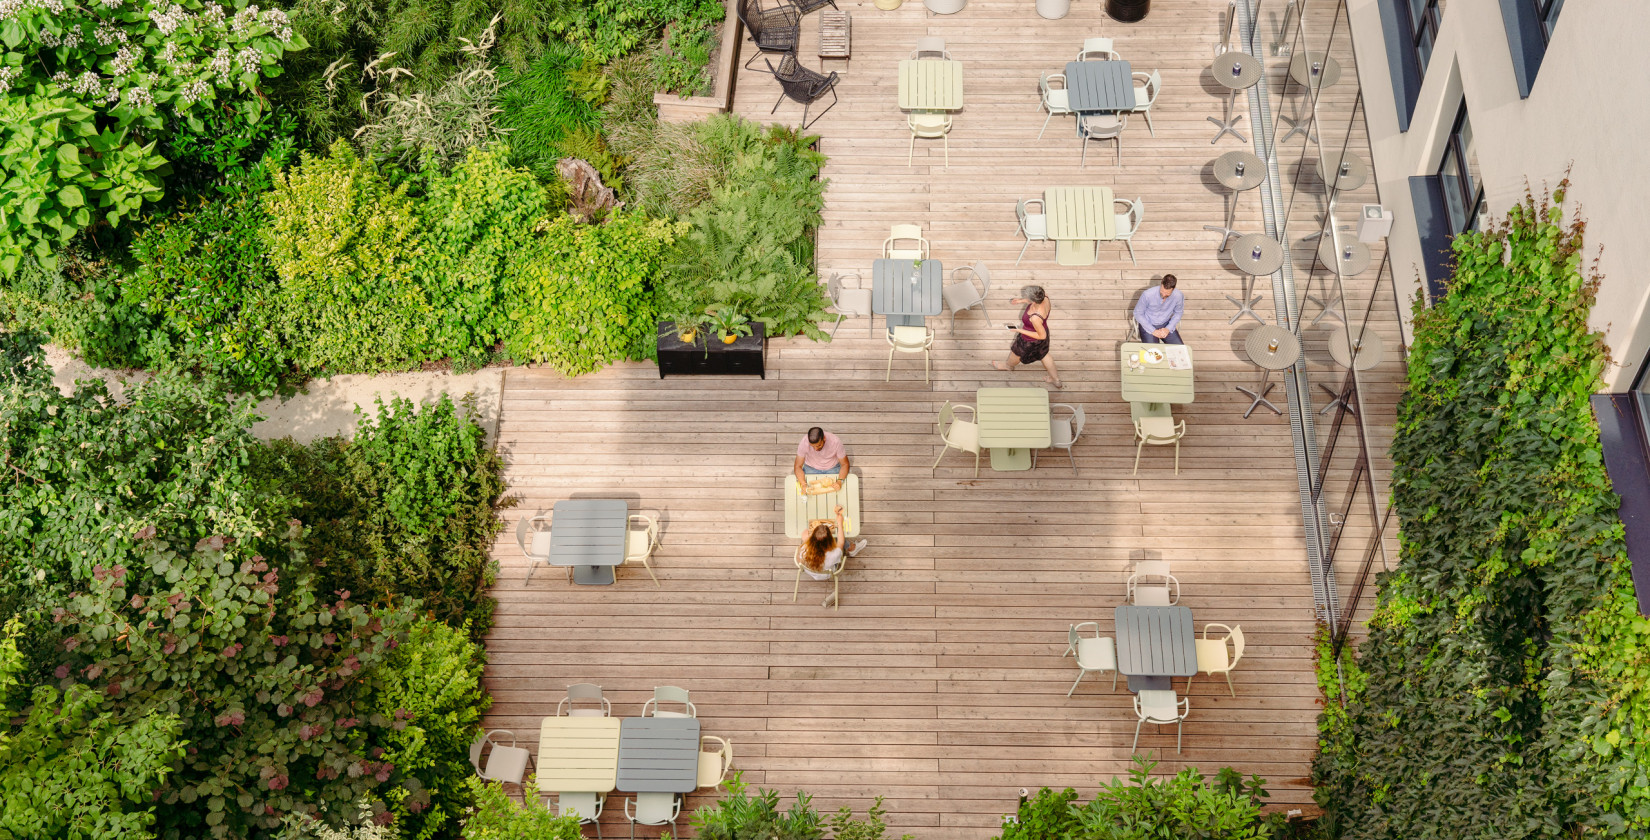 Wooden terrace with metal tables and colorful chairs taken from bird's eye view